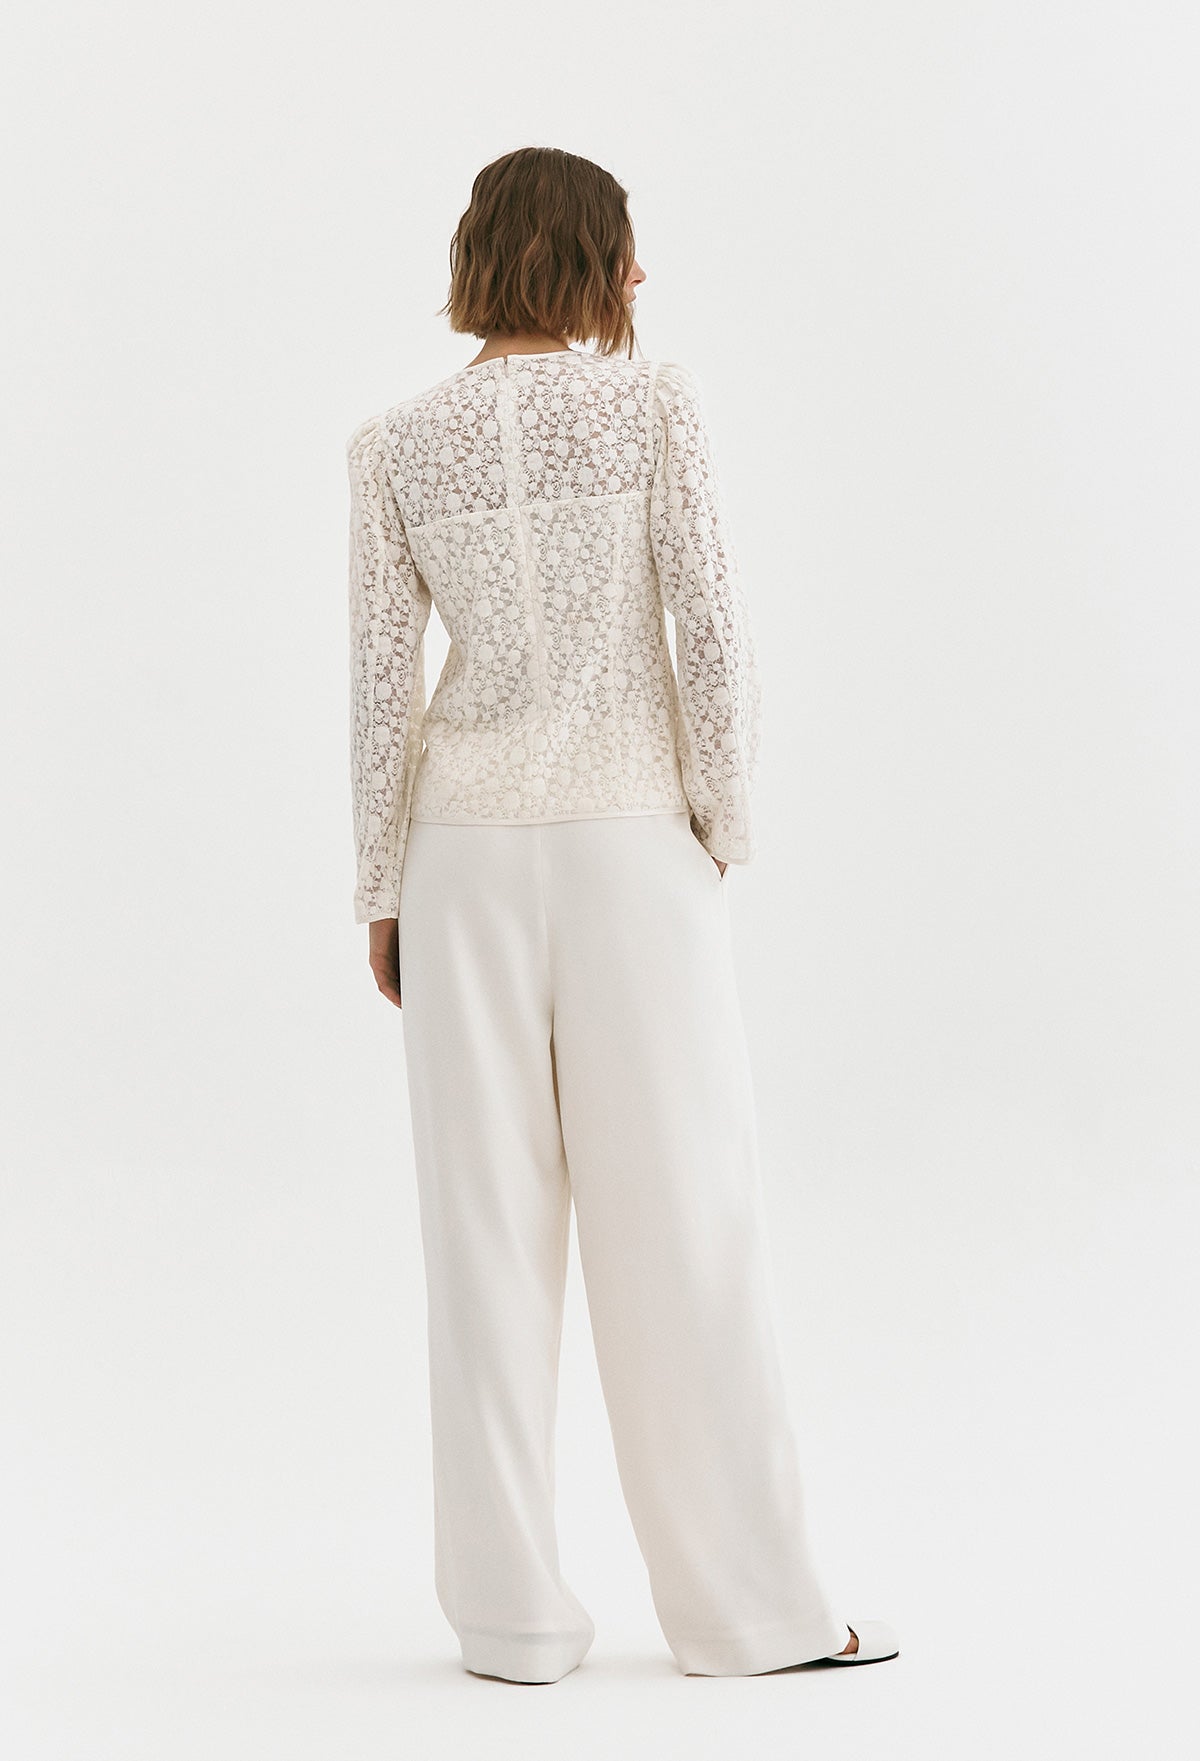 Lace Corset Blouse In Ivory